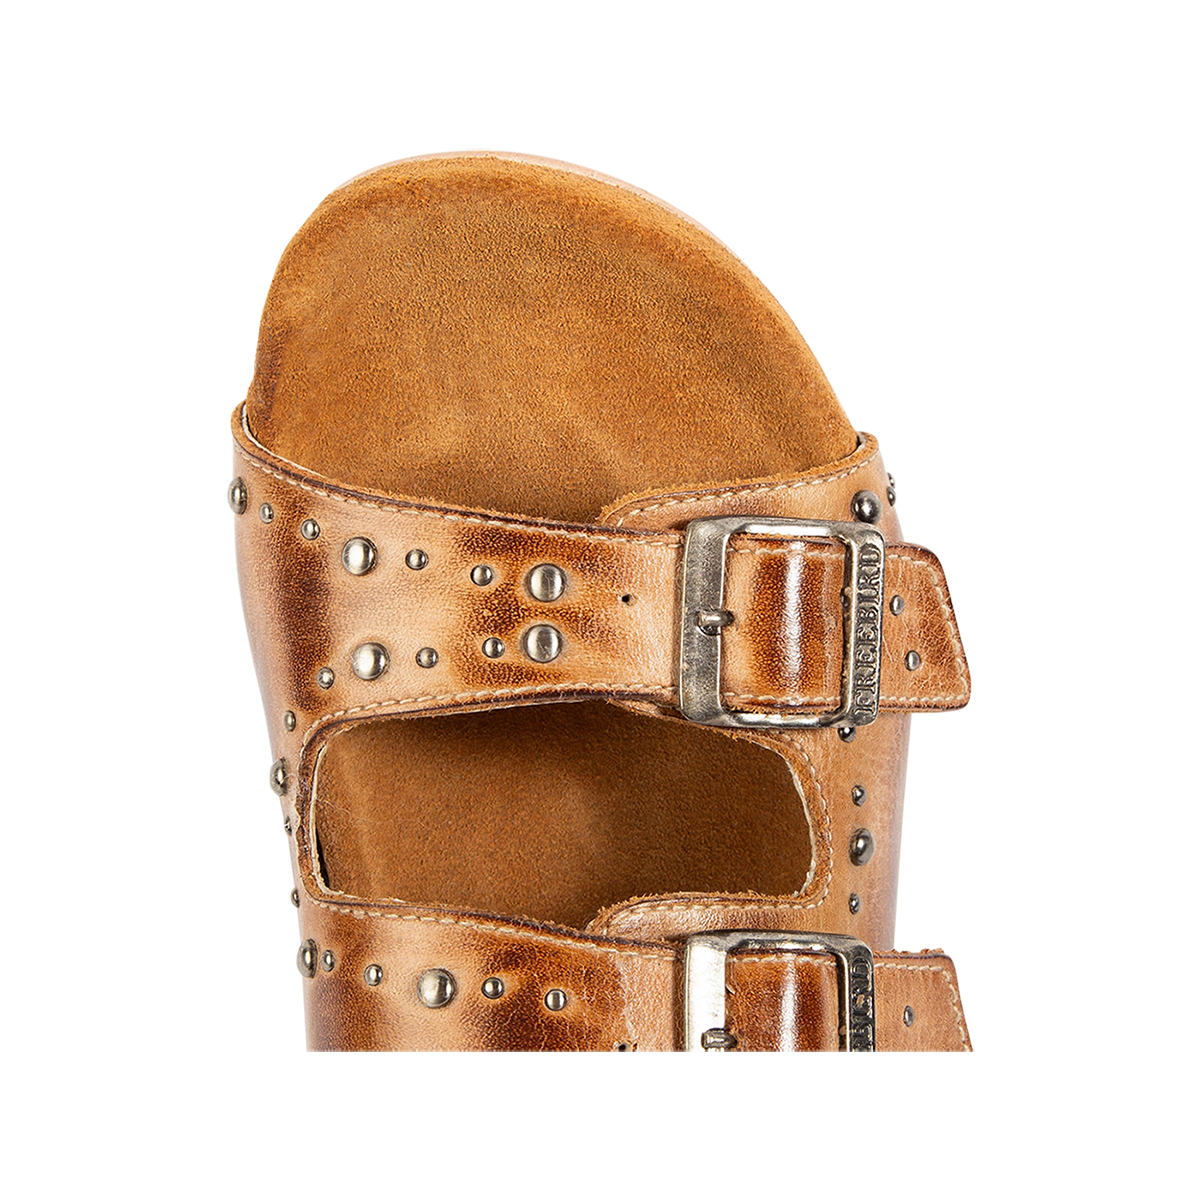 Top view showing a rounded exposed toe bed on FREEBIRD women's Asher wheat sandal